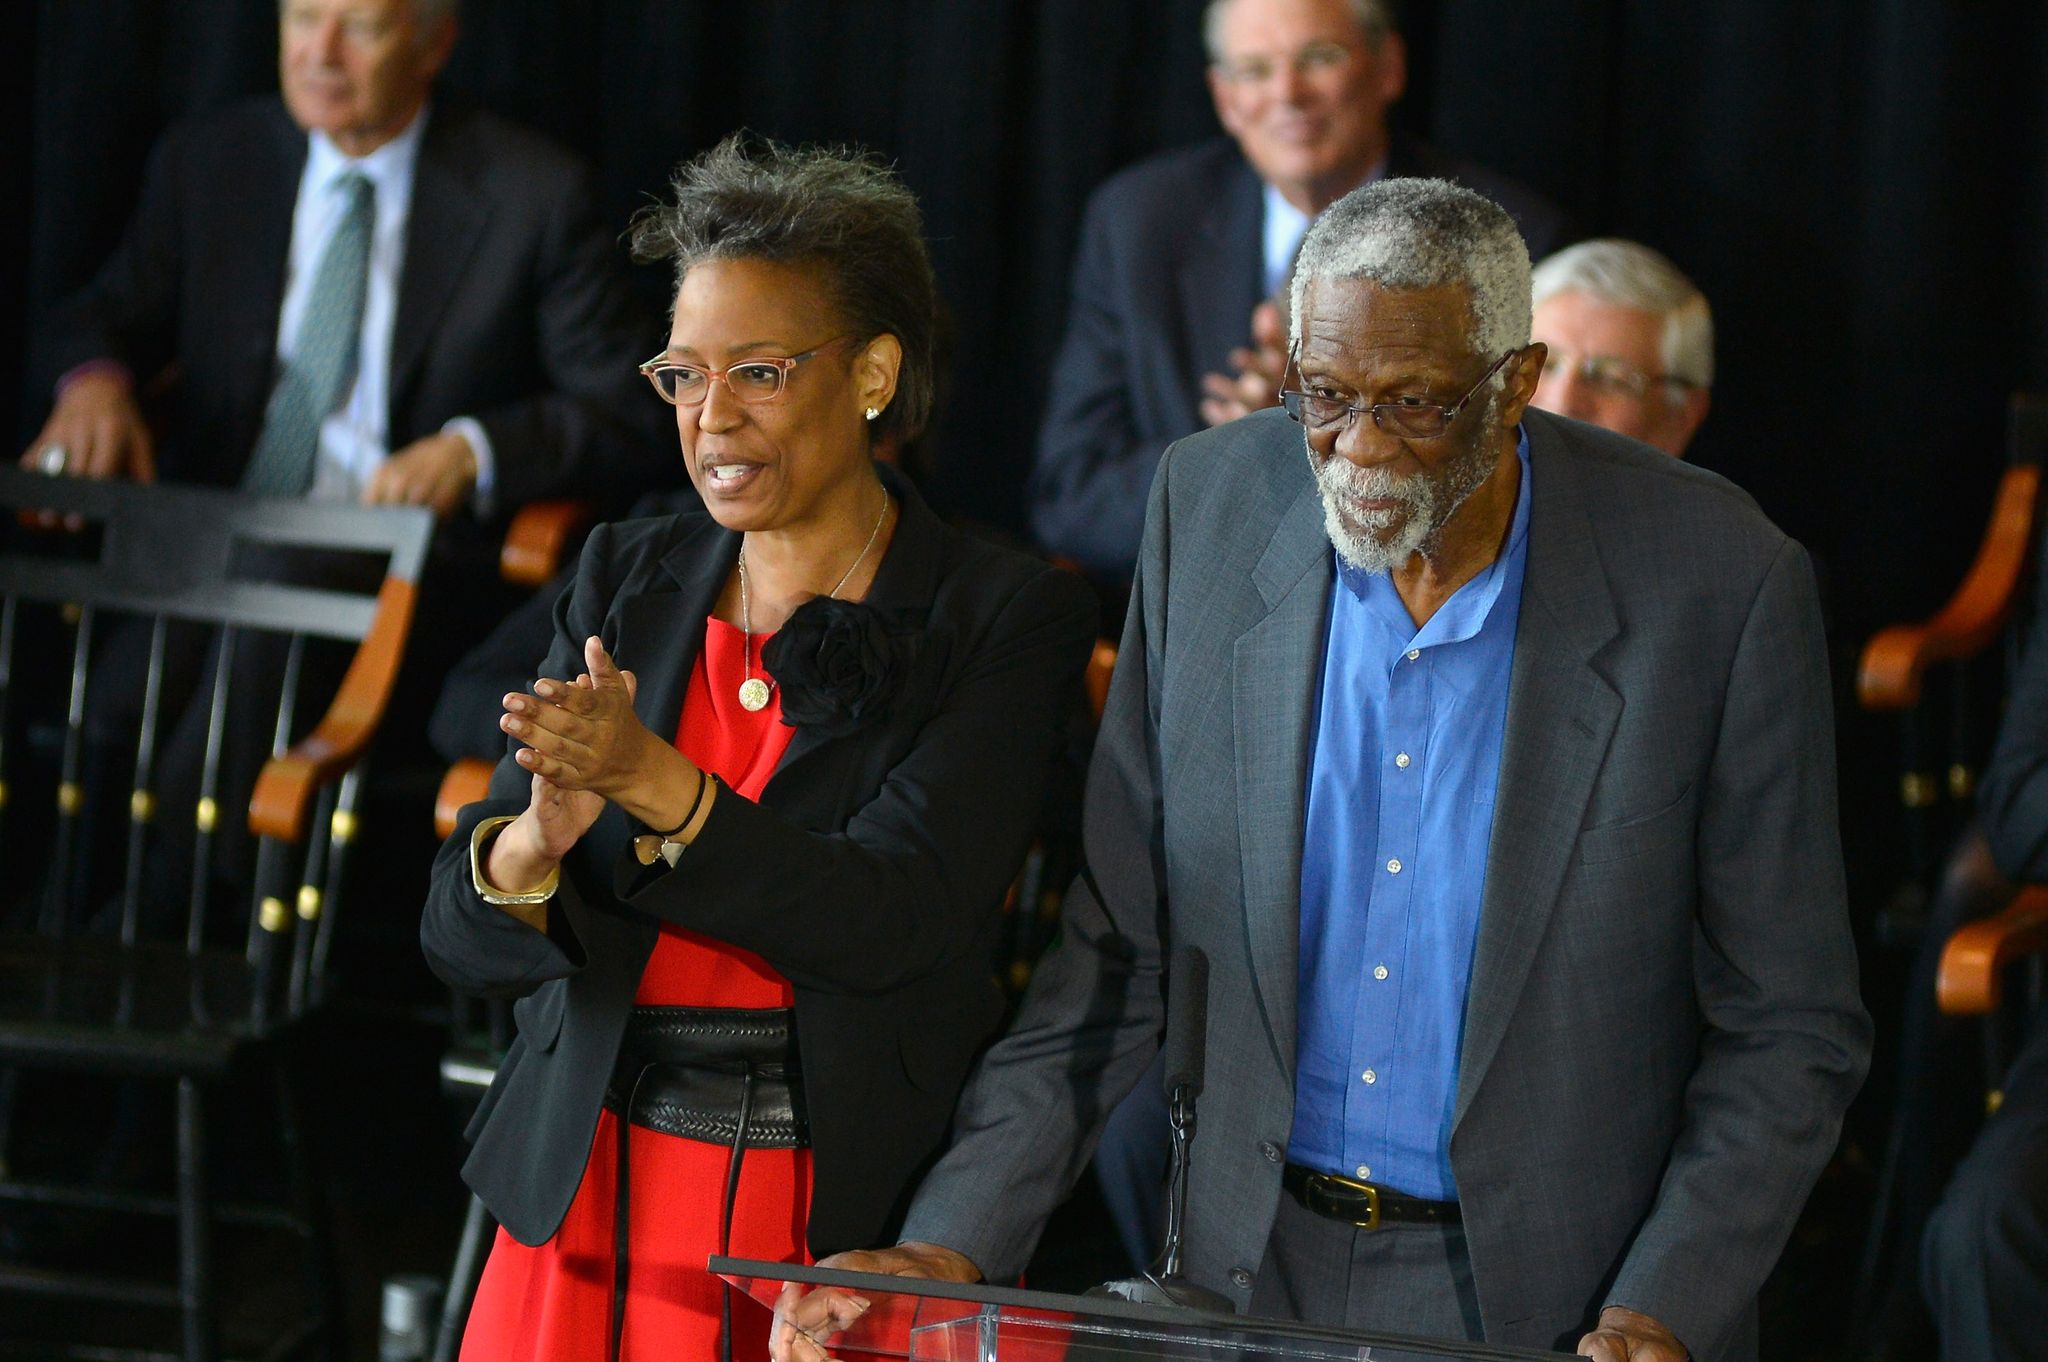 Karen Kenyatta Russell and Bill Russell at the unveiling of a statue honoring the Boston Celtics player at Boston City Hall Plaza in 2013. | Source: Getty Images